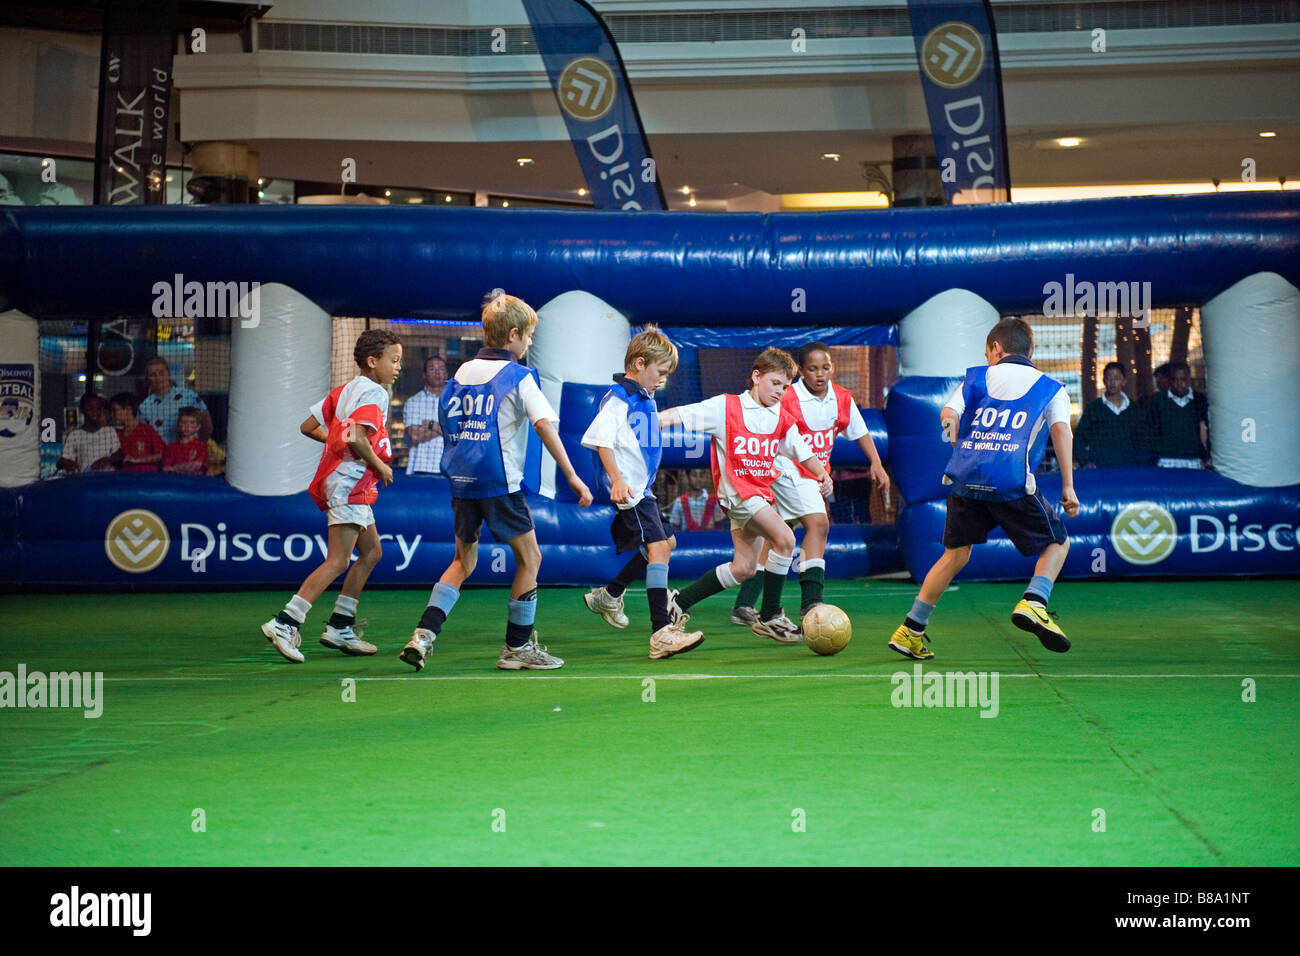 Boys playing in an indoor soccer competition at Canal Walk Mall in Cape Town South Africa Stock Photo